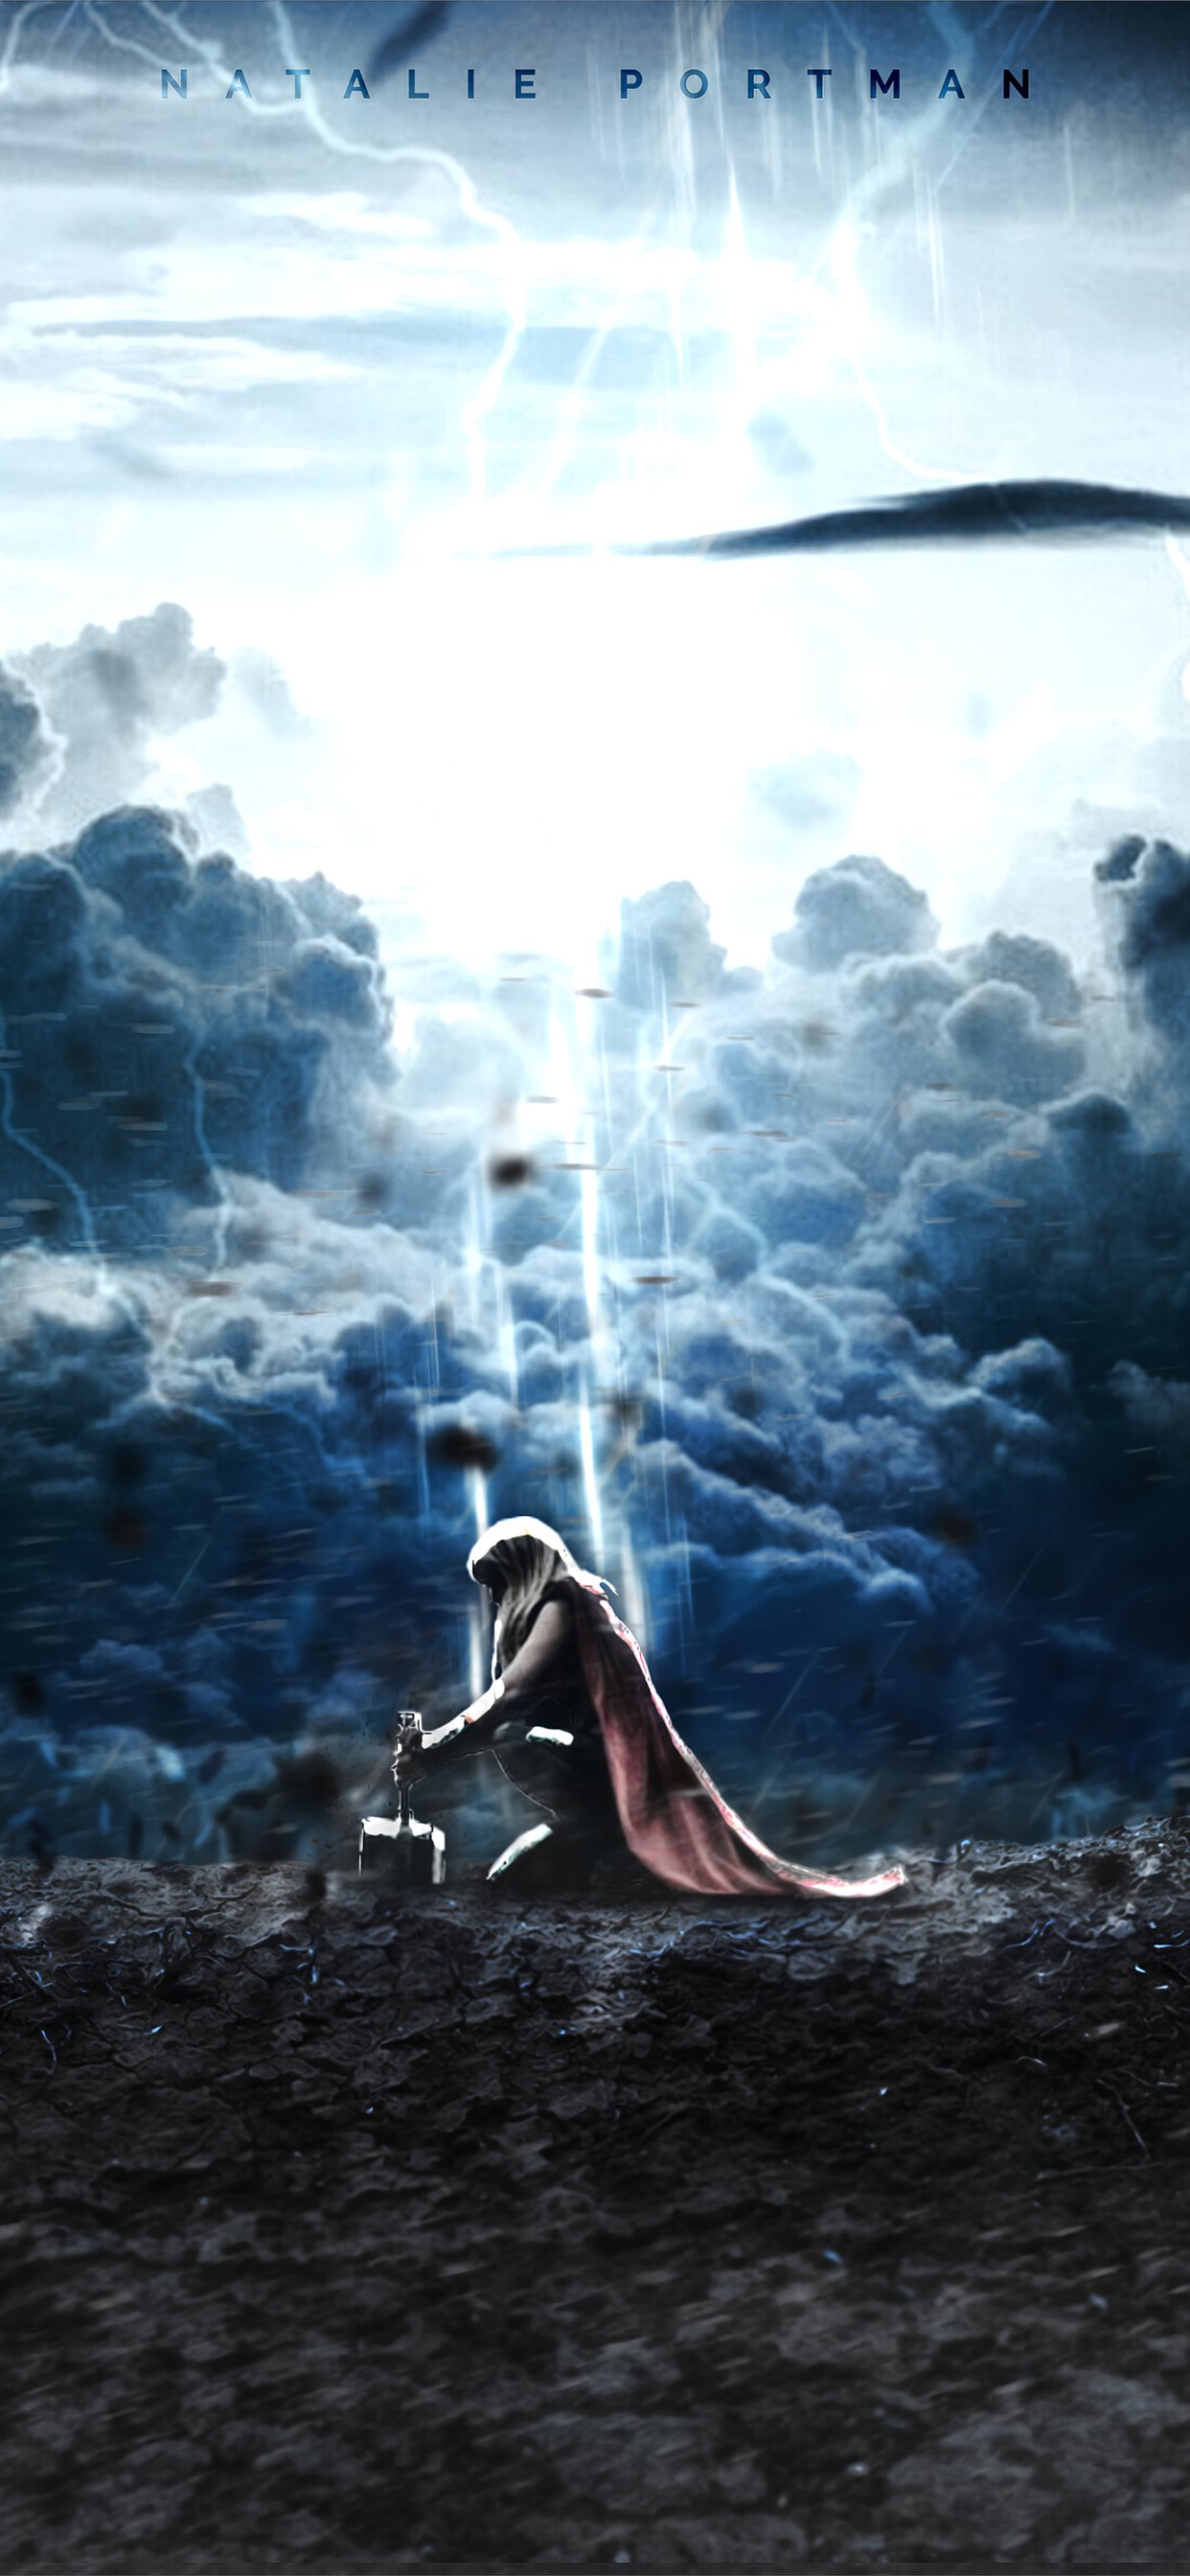 Thor Wallpaper Android